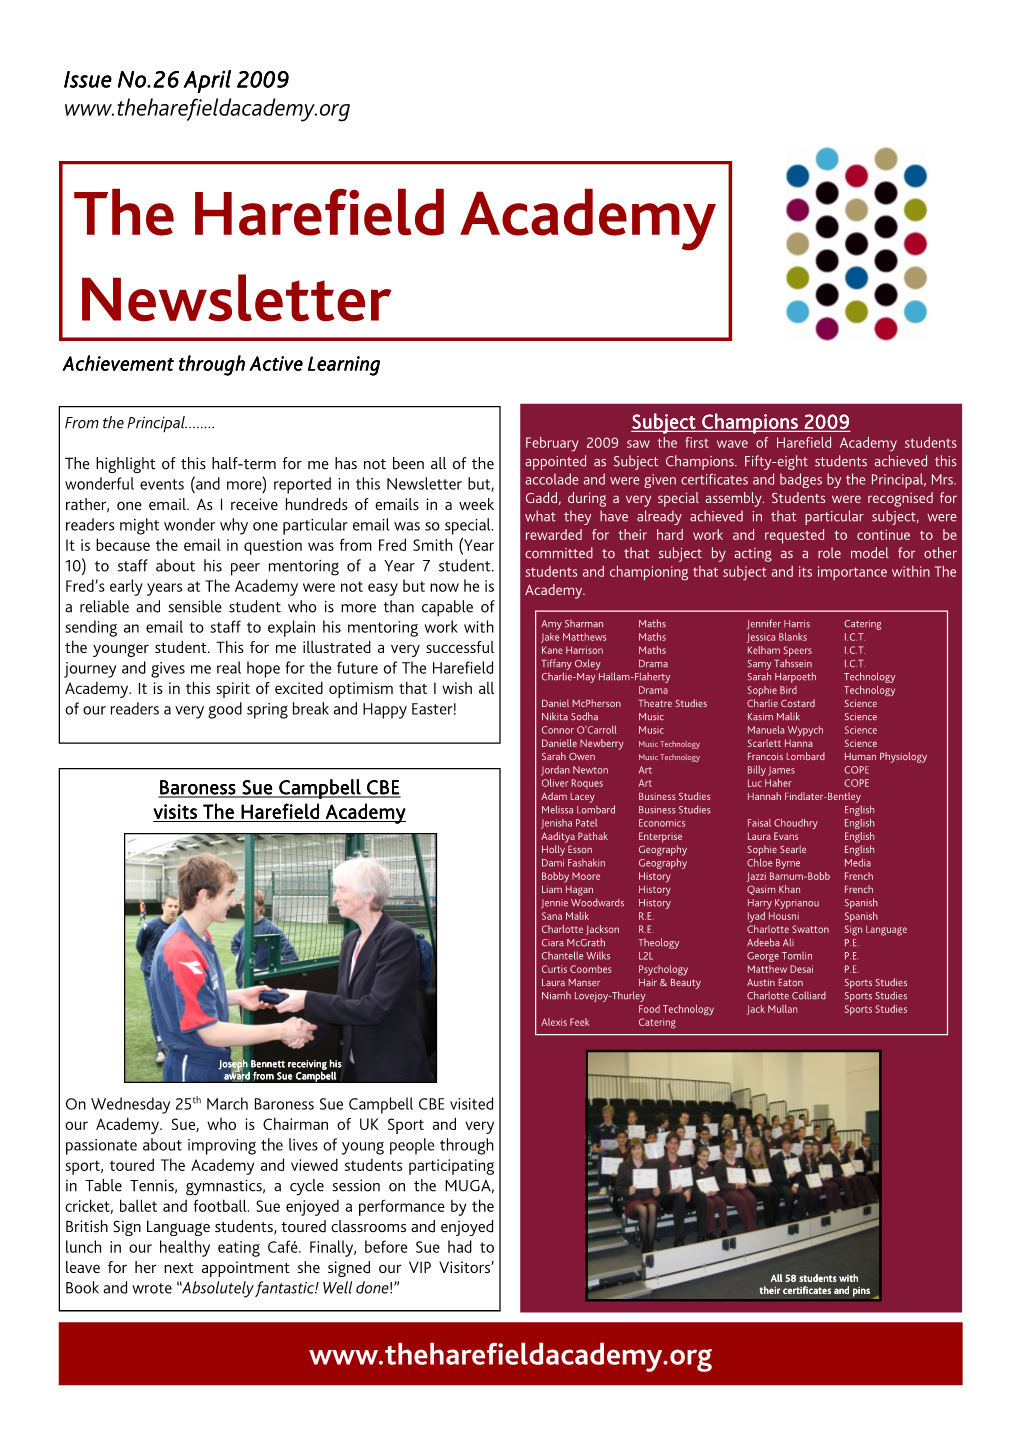 The Harefield Academy Newsletter Achievement Through Active Learning